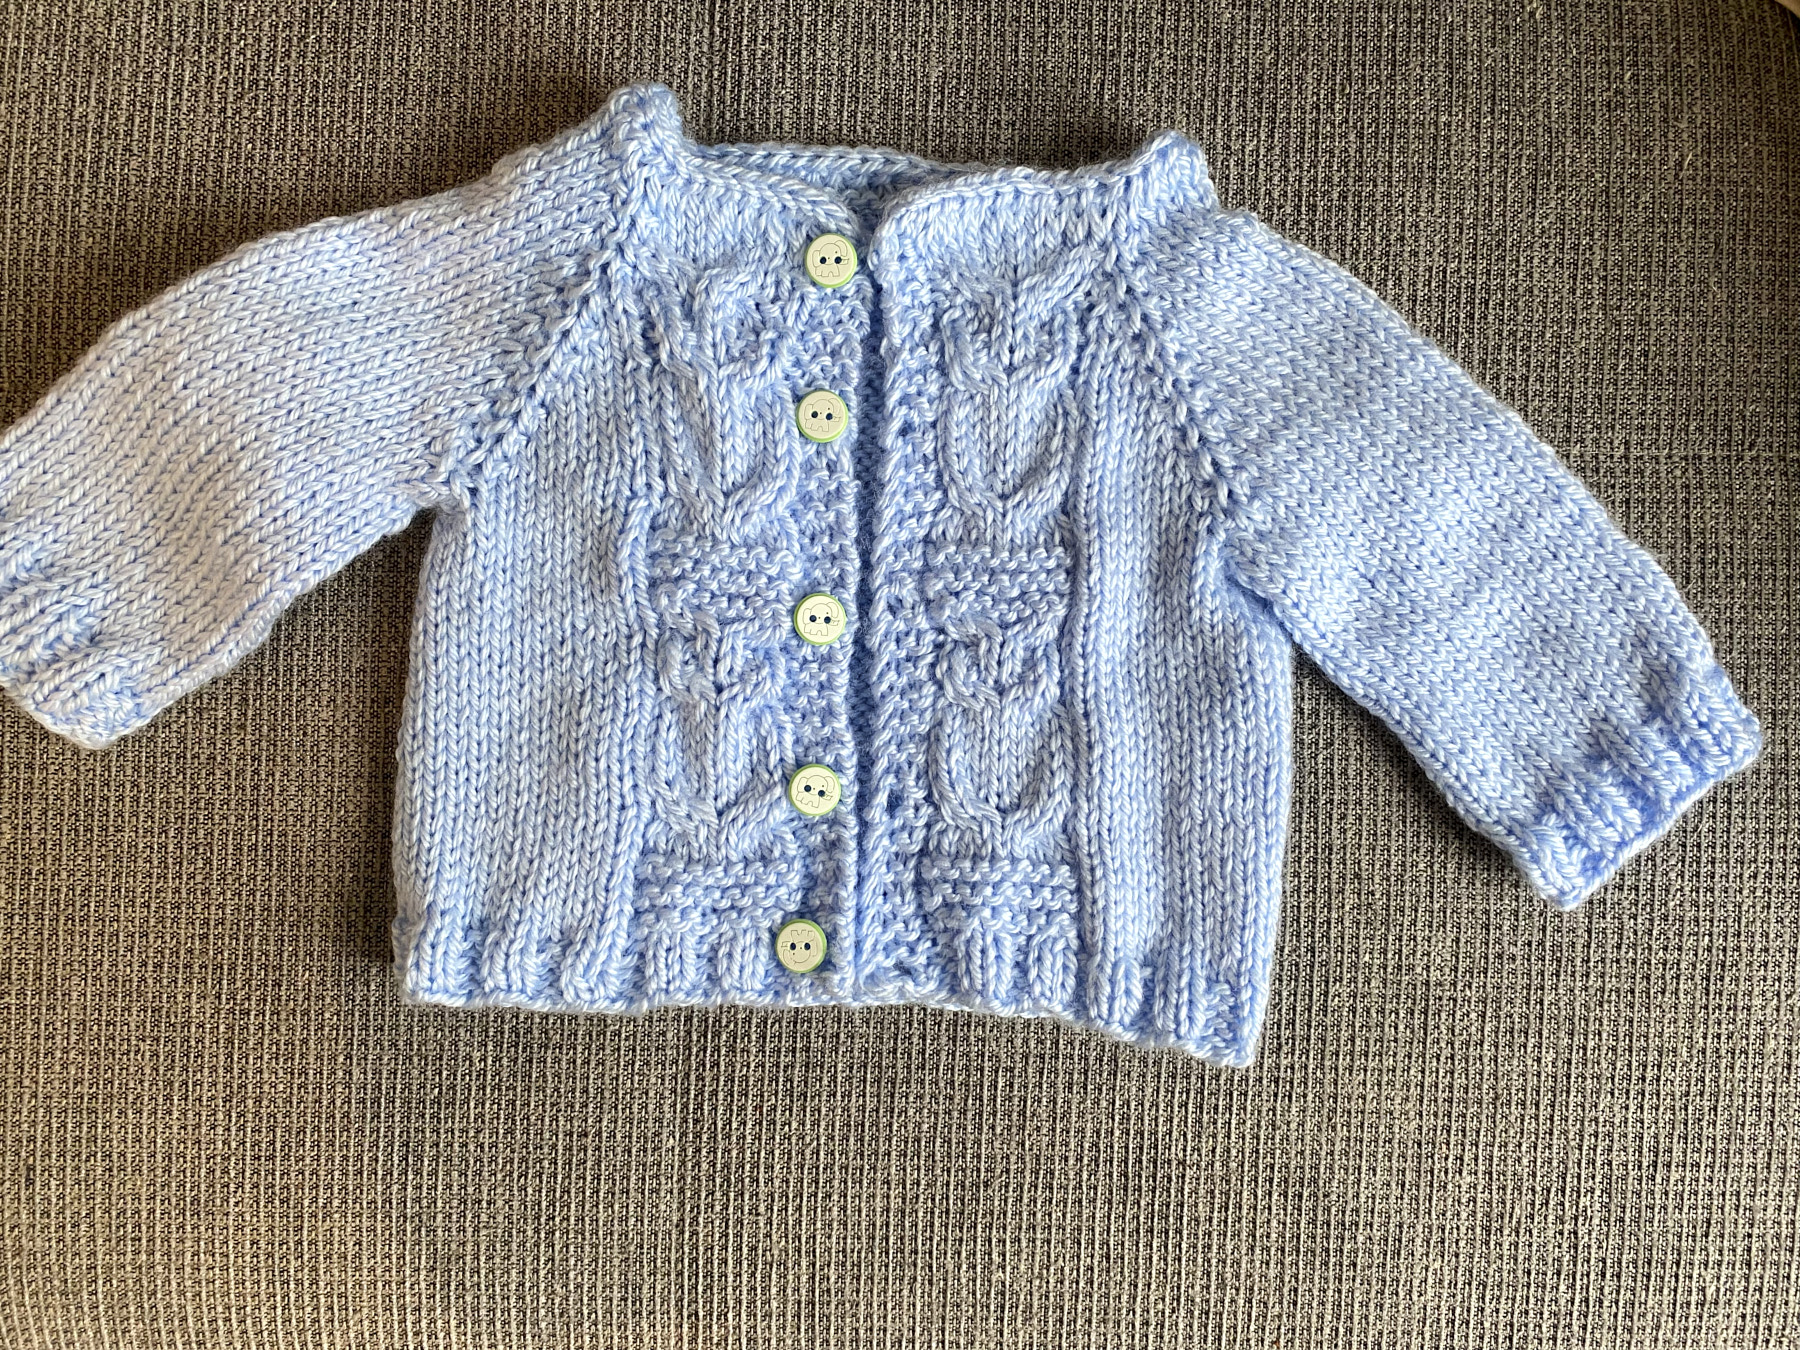 Baby blue sweater with owls and elephant buttons